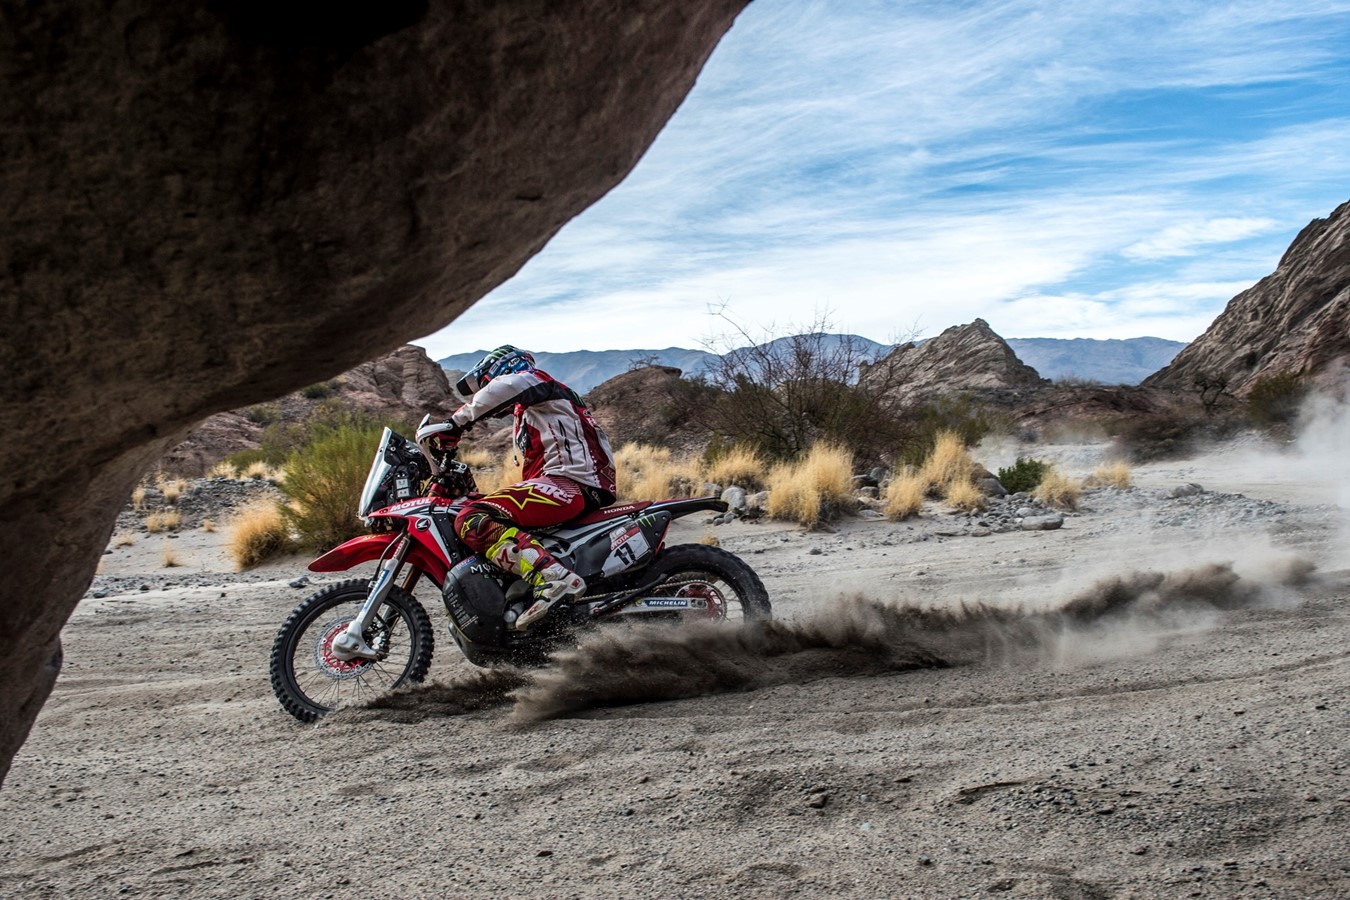 One-two for Monster Energy Honda Team overall as the Desafío Ruta 40 concludes